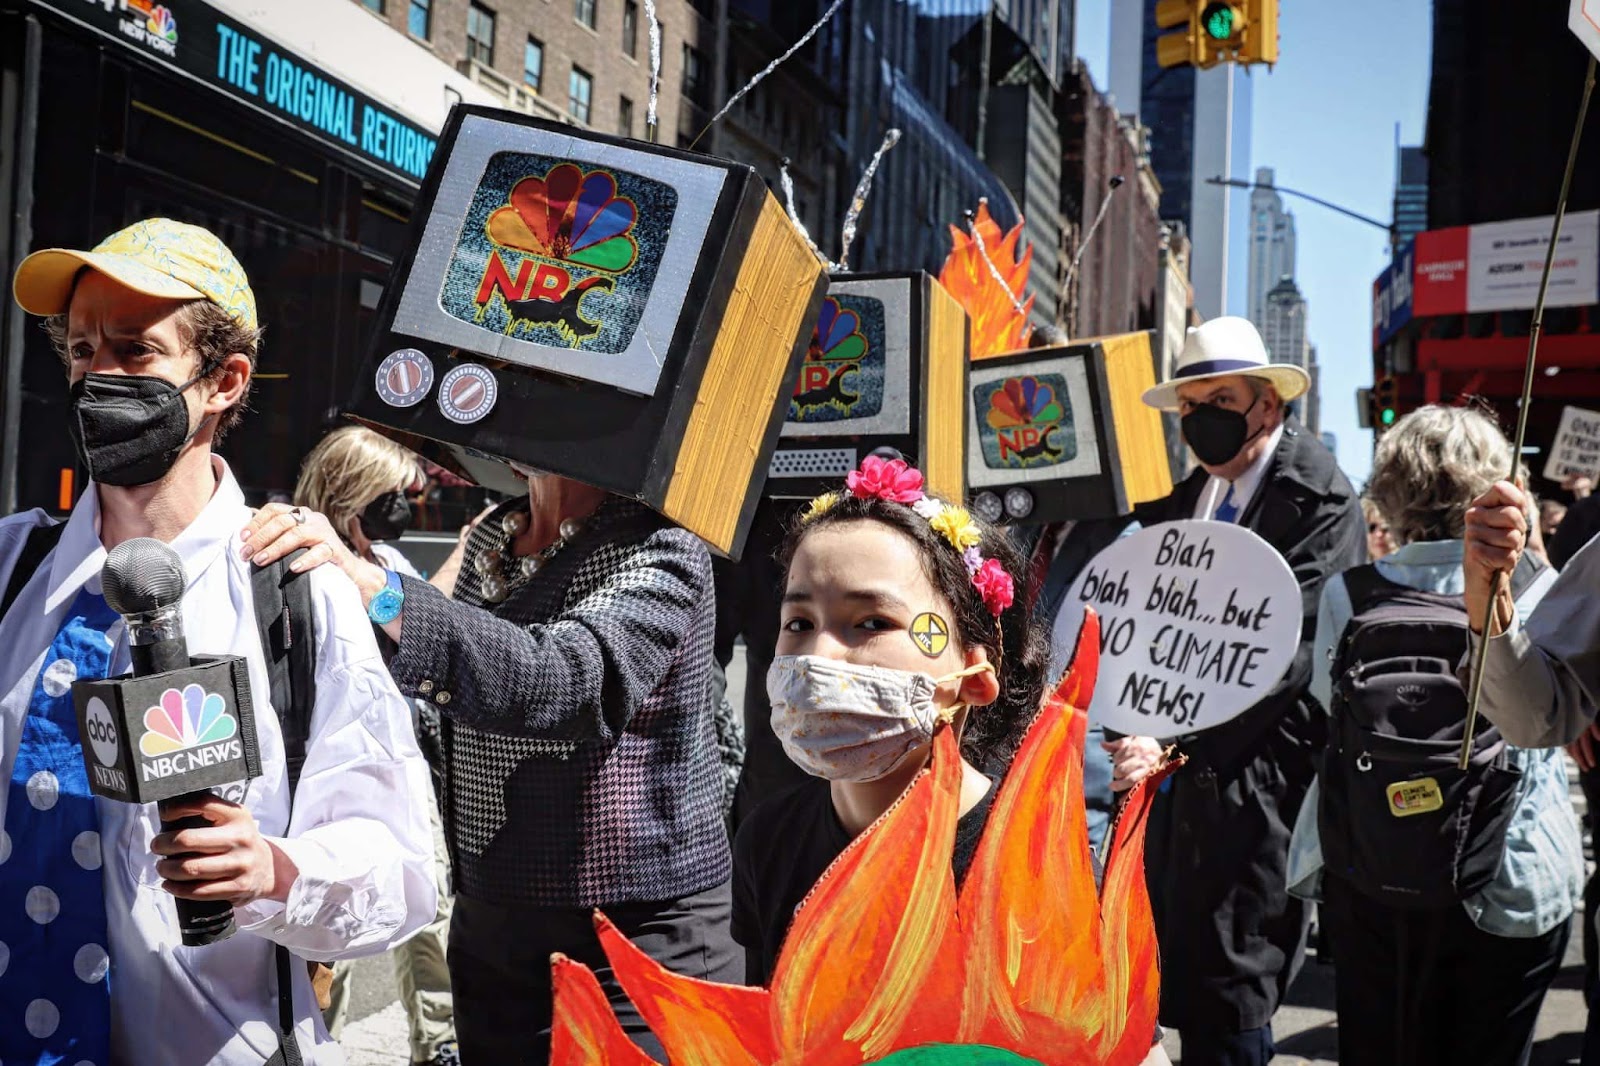 Rebels with tv set helmets and fire ensignia march outside the NBC offices in New York